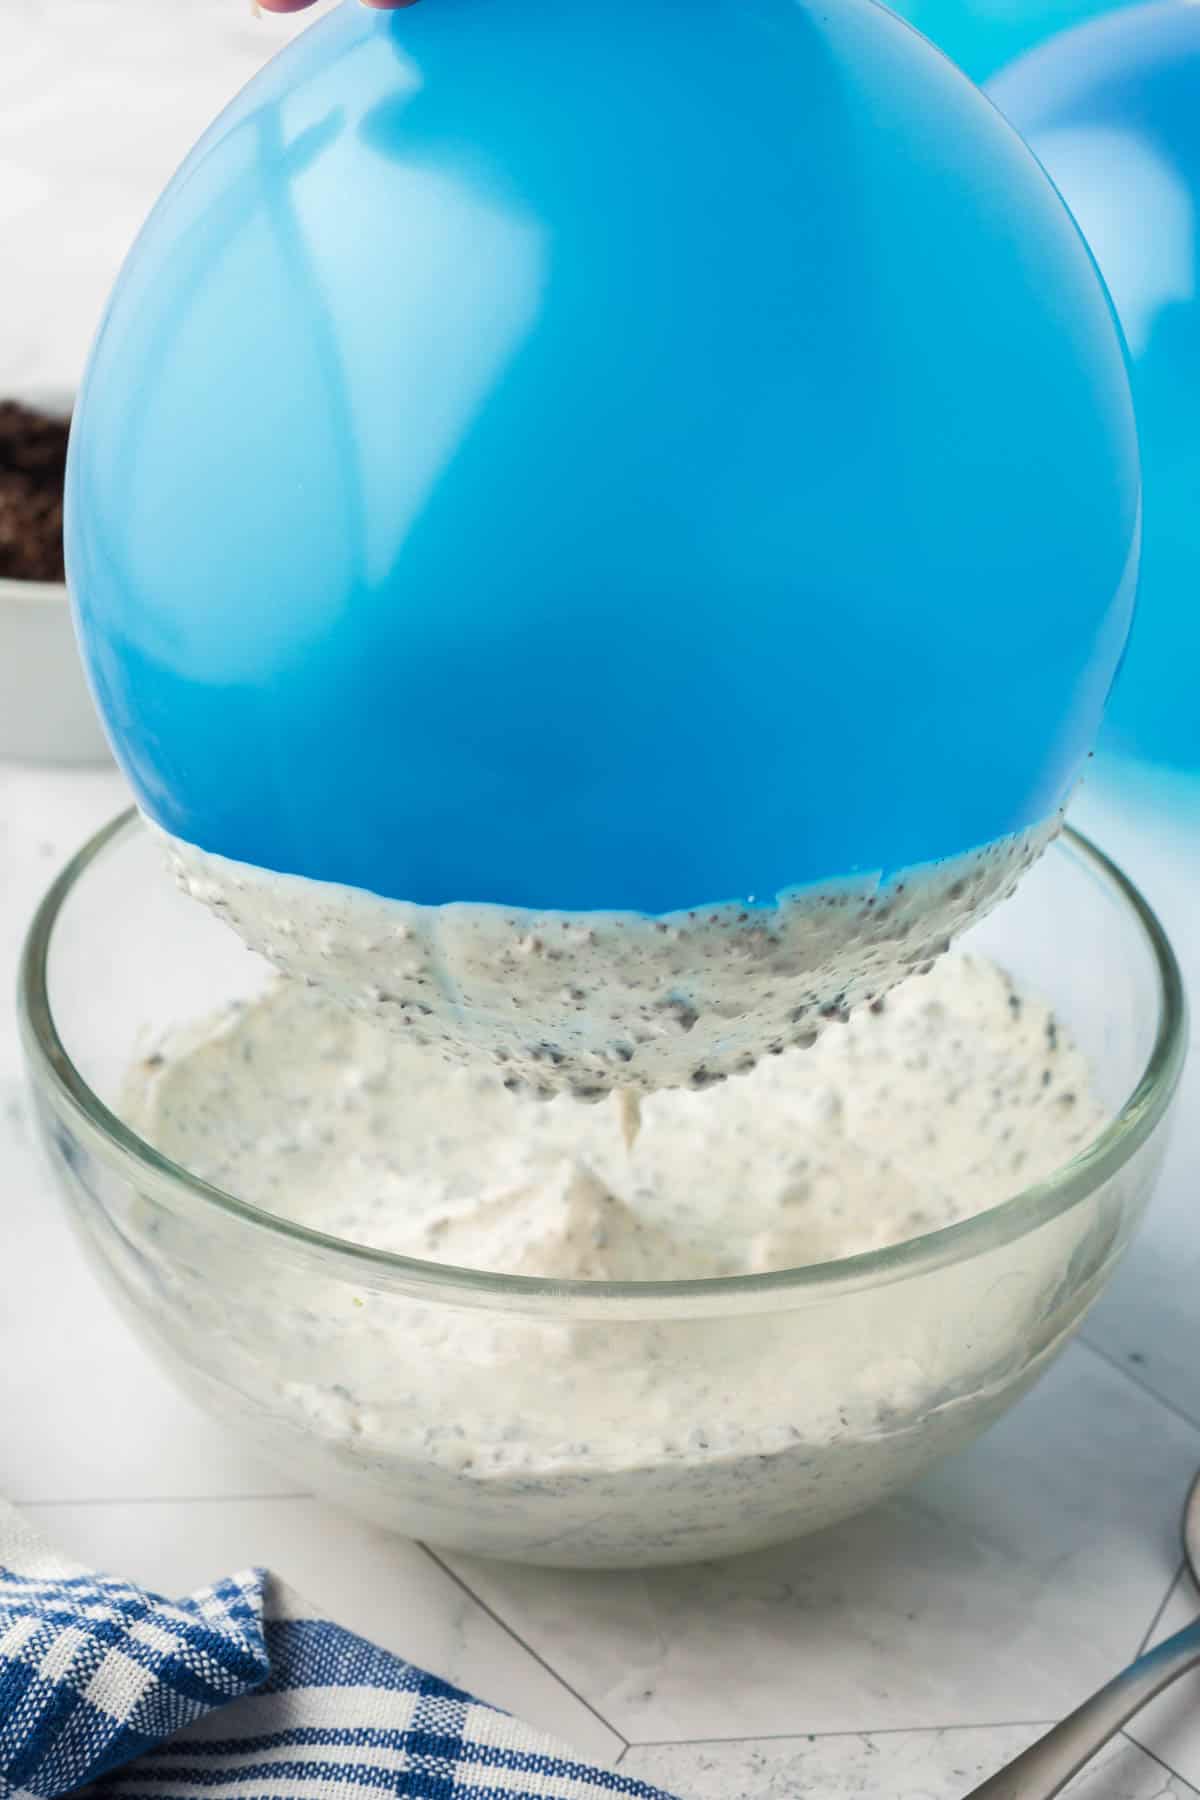 Lifting a blue balloon out of a bowl of melted cookies and cream mixture.